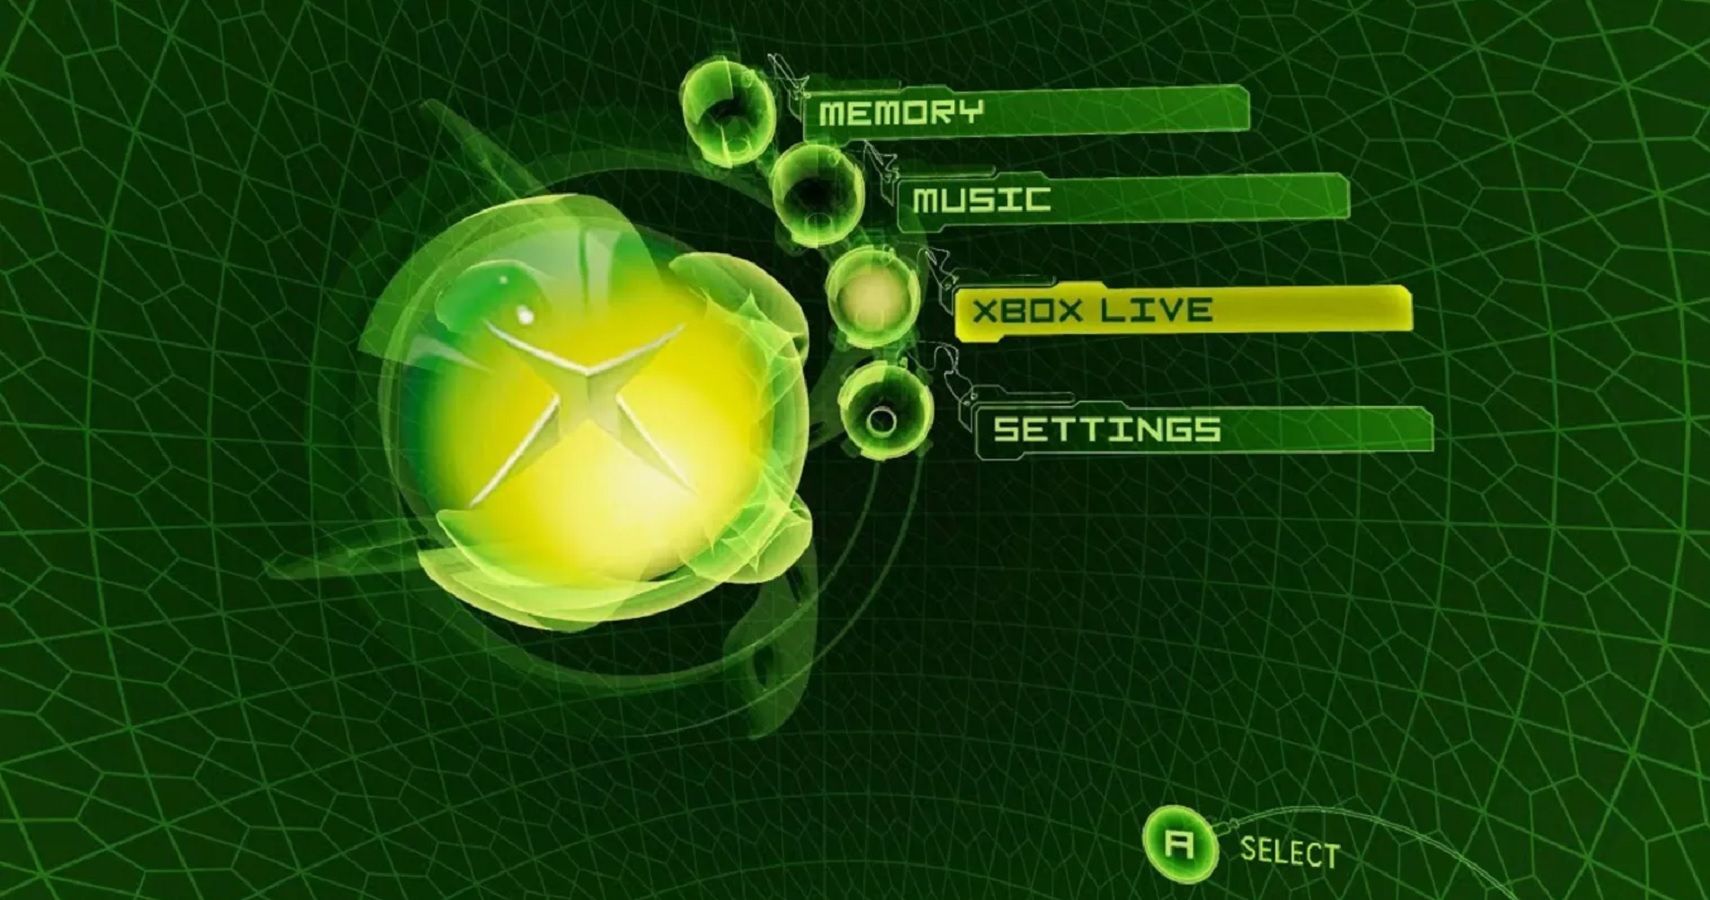 baas gracht Deens The original Xbox background is now a free dynamic theme on Series X and S  | VGC